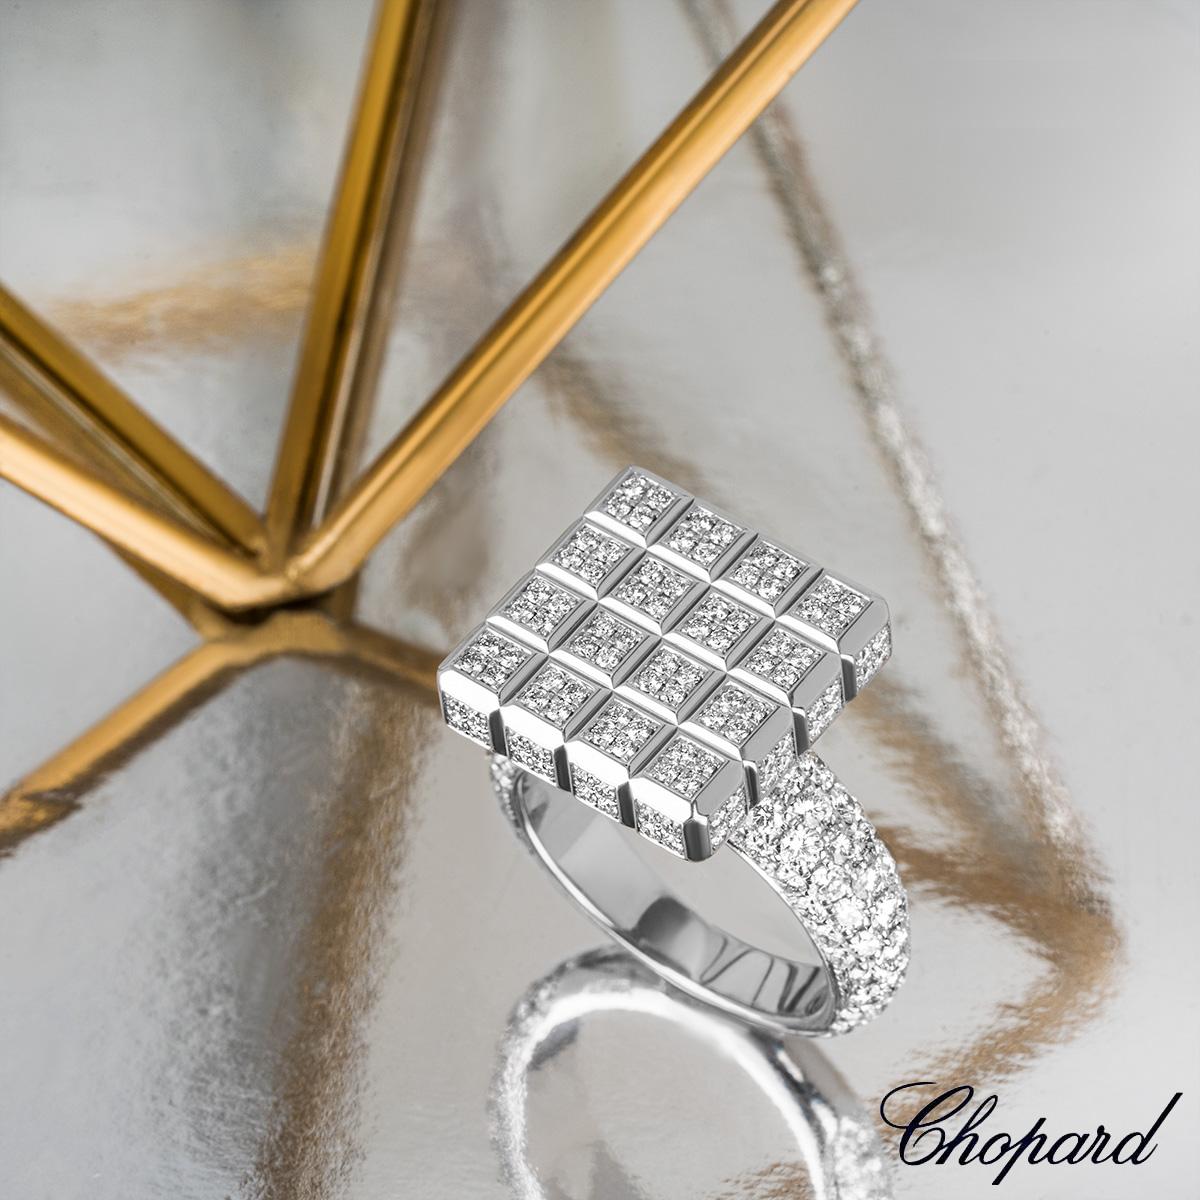 Chopard 18k White Gold Diamond Set Ice Cube Ring B&P 825442-1109 In Excellent Condition For Sale In London, GB